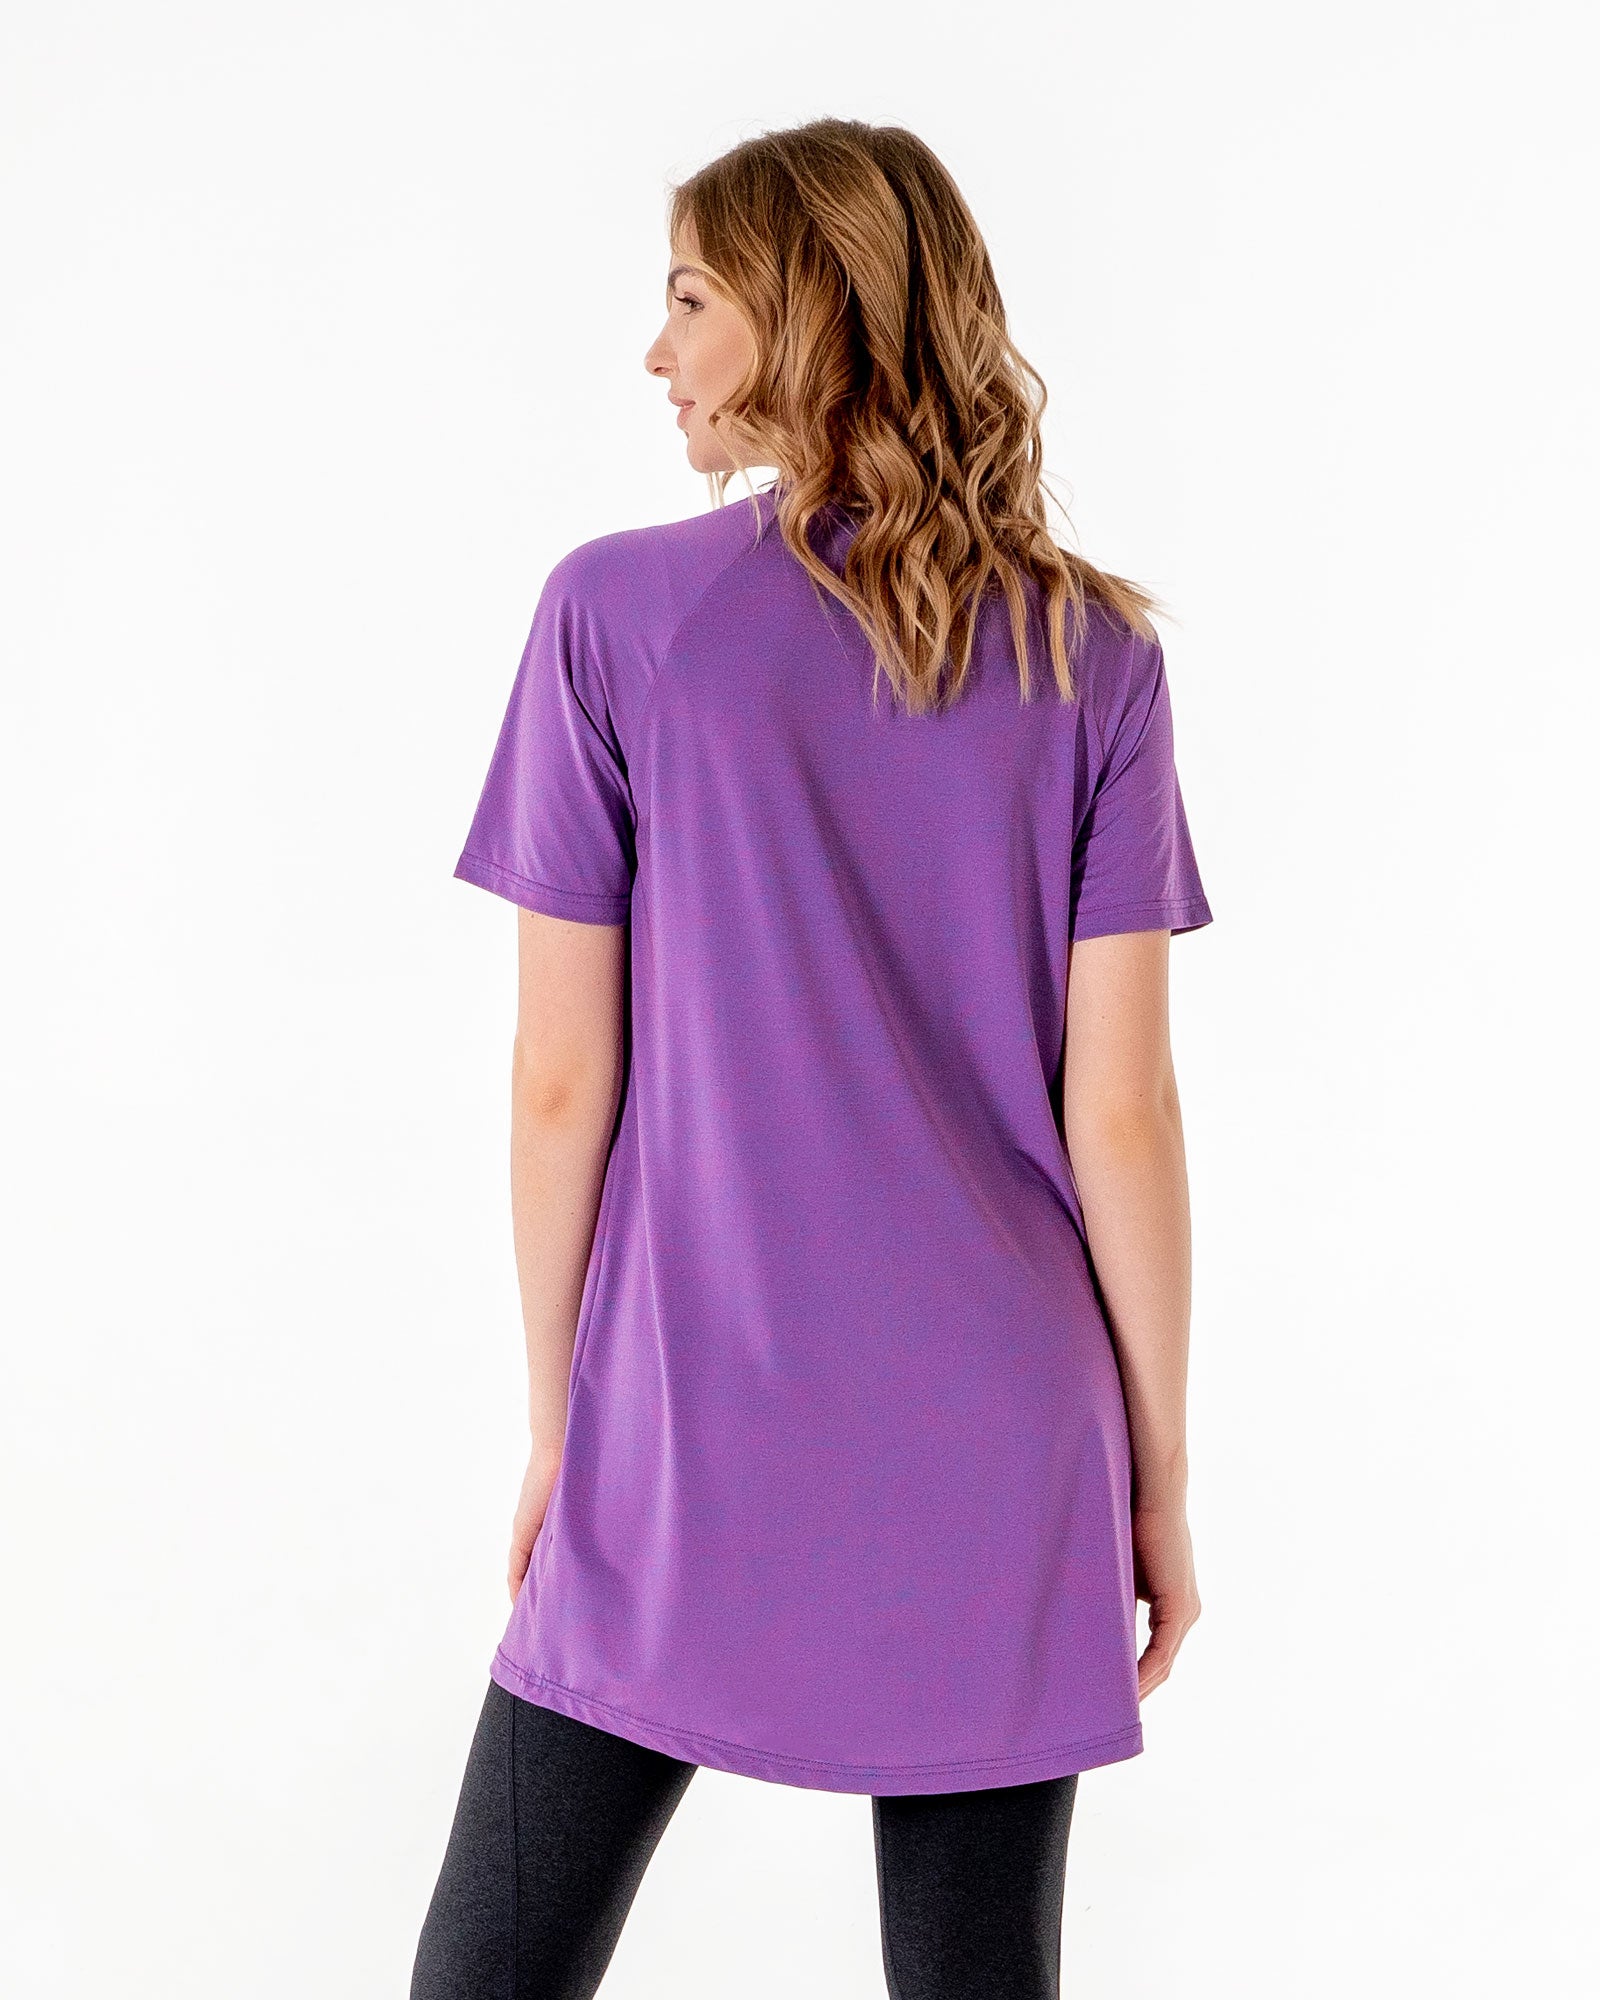 Connect T-Shirt Dress in Pink by Veil Garments. Modest activewear collection.